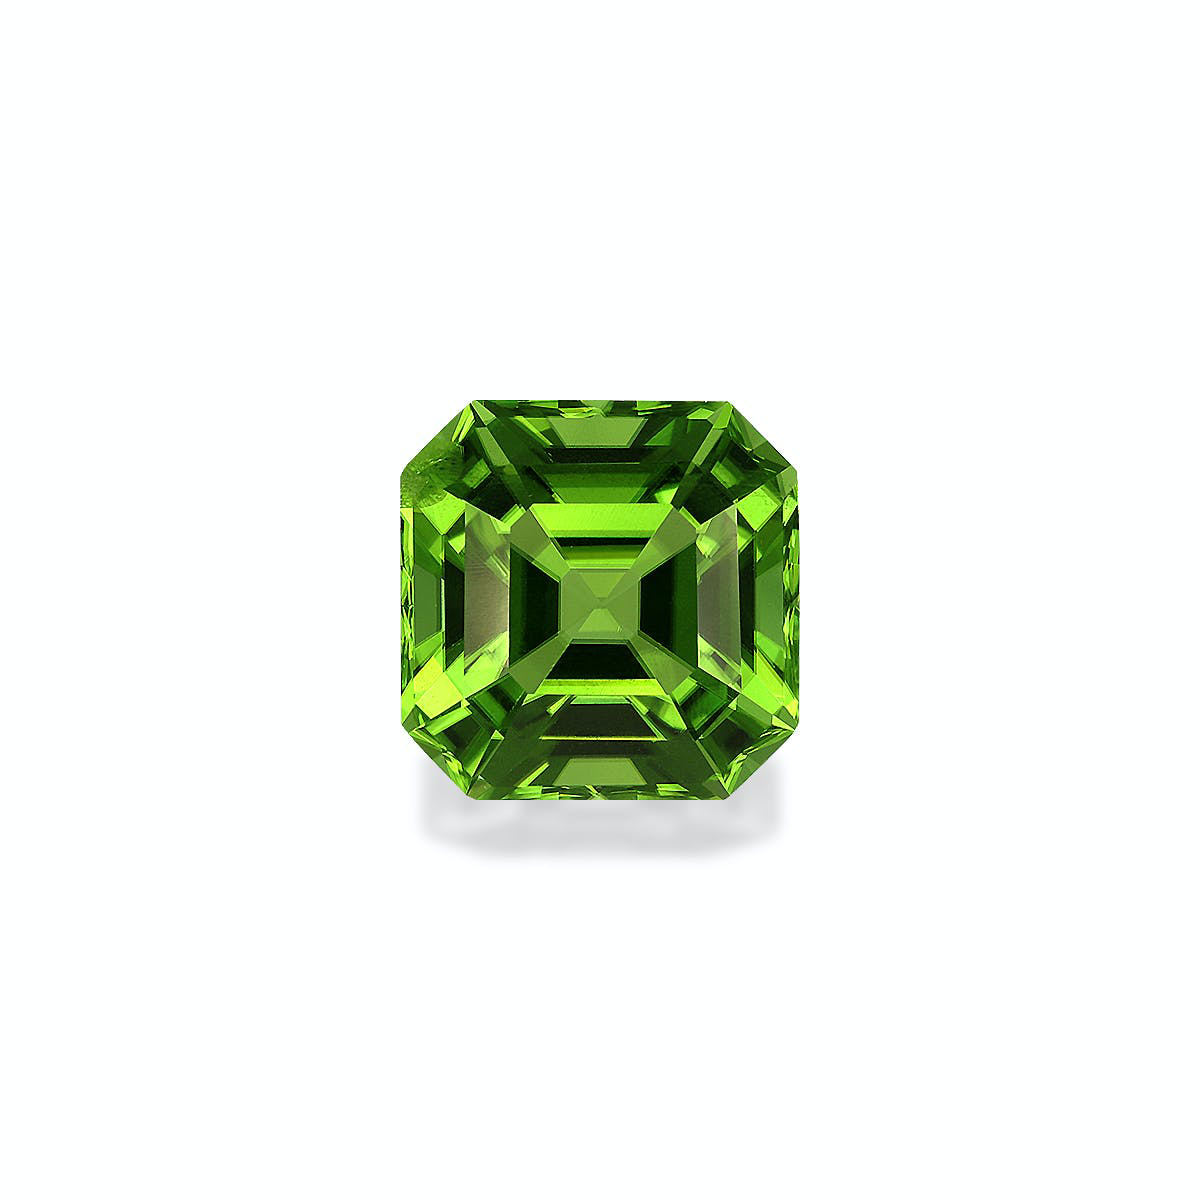 Picture of Vivid Green Peridot 8.27ct - 11mm (PD0348)